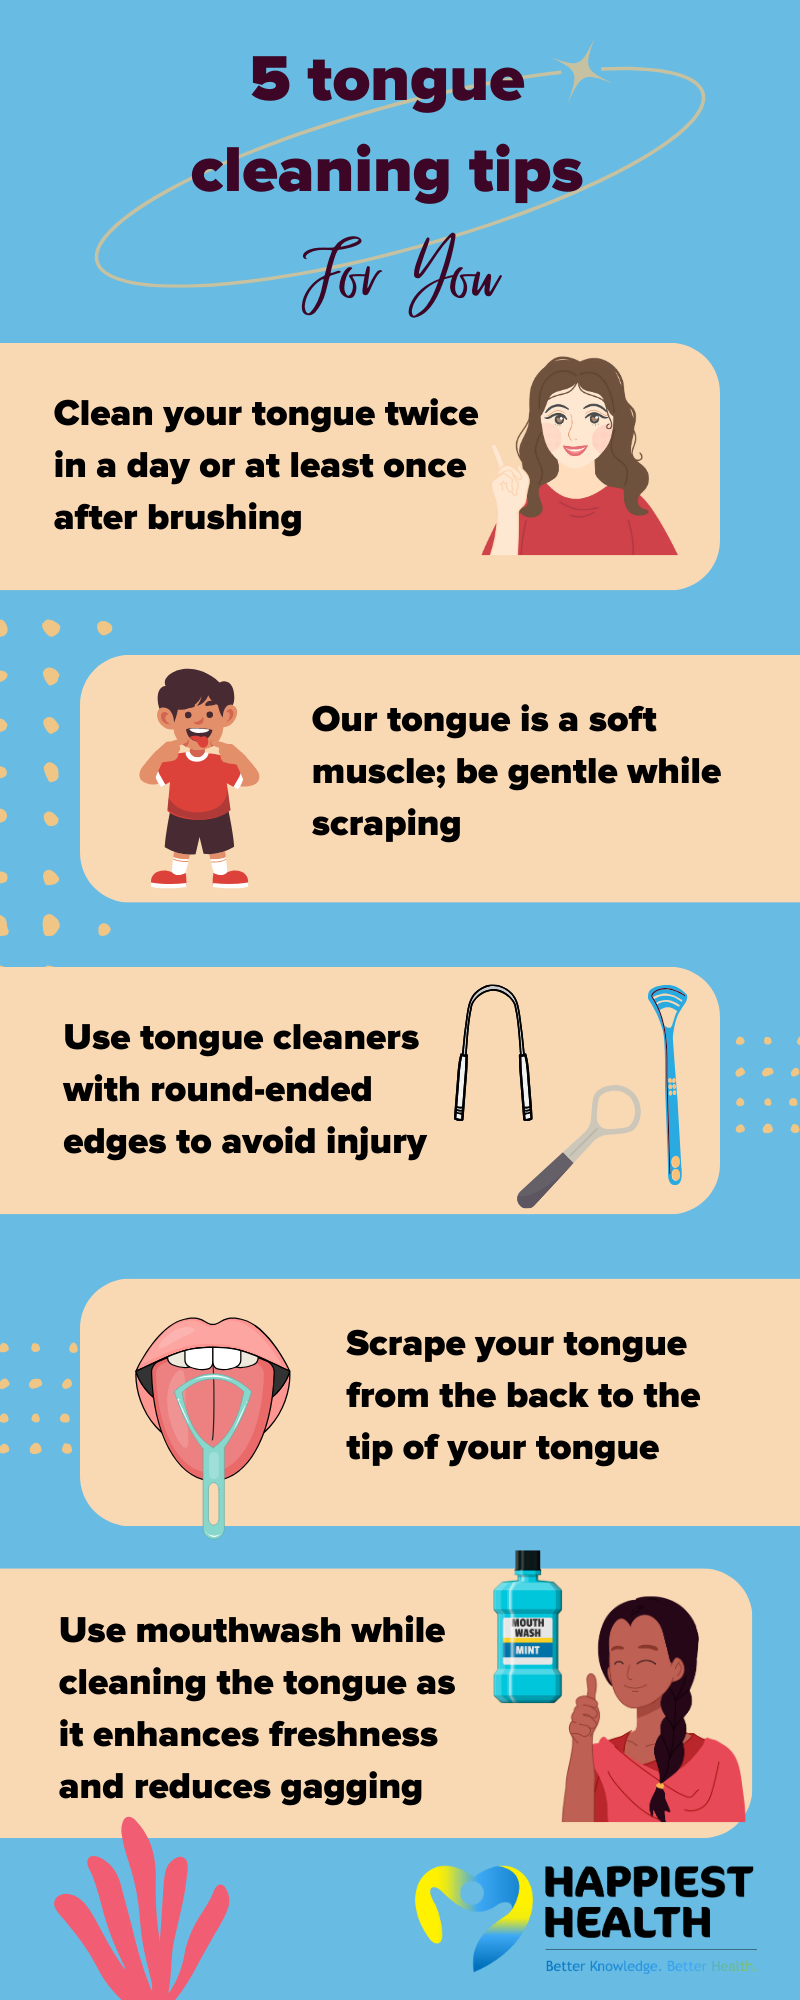 5 tongue cleaning tips